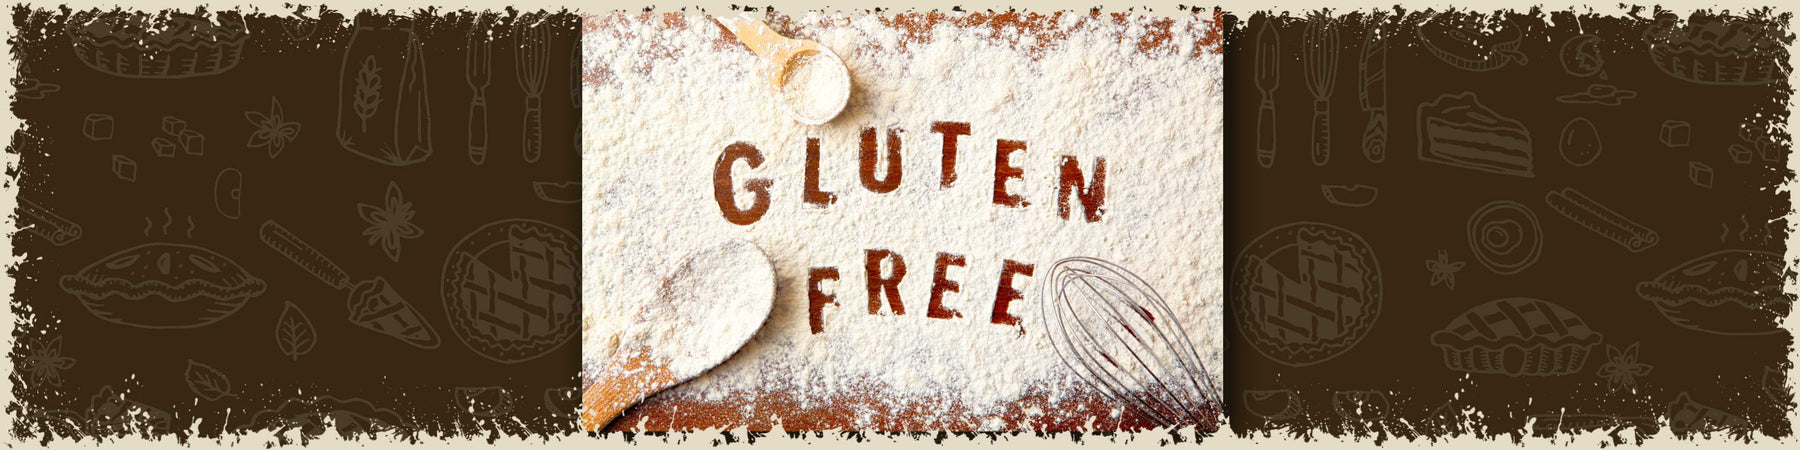 Tips & Tricks for Thriving on The Gluten-Free Lifestyle